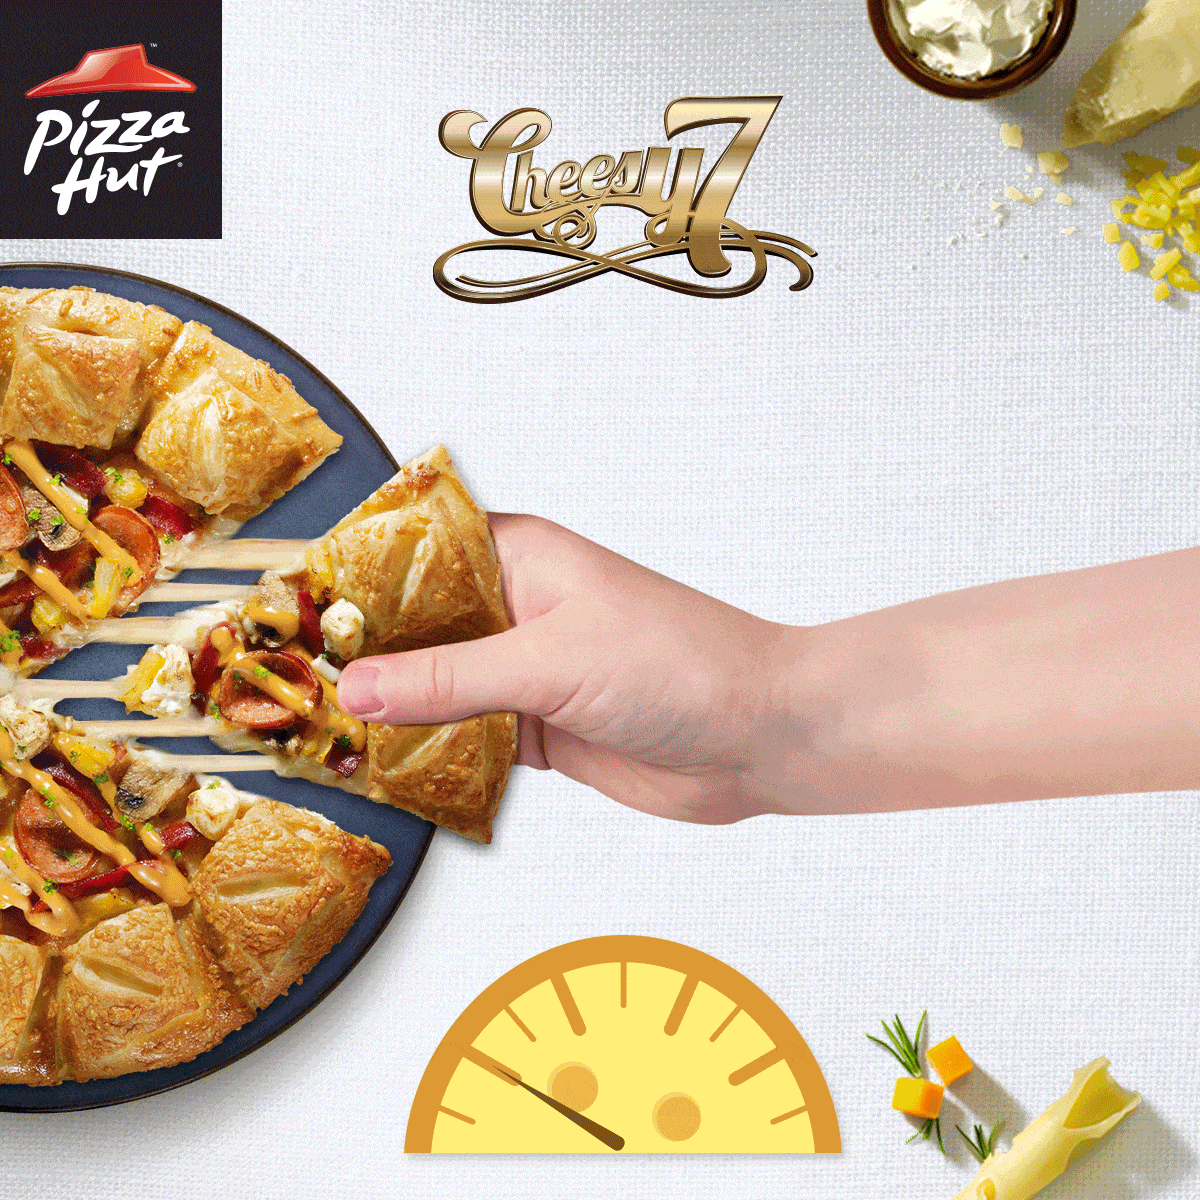 Pizza Hut Singapore New Cheesy 7 Pizza Facebook Contest ends 23 Aug 2016